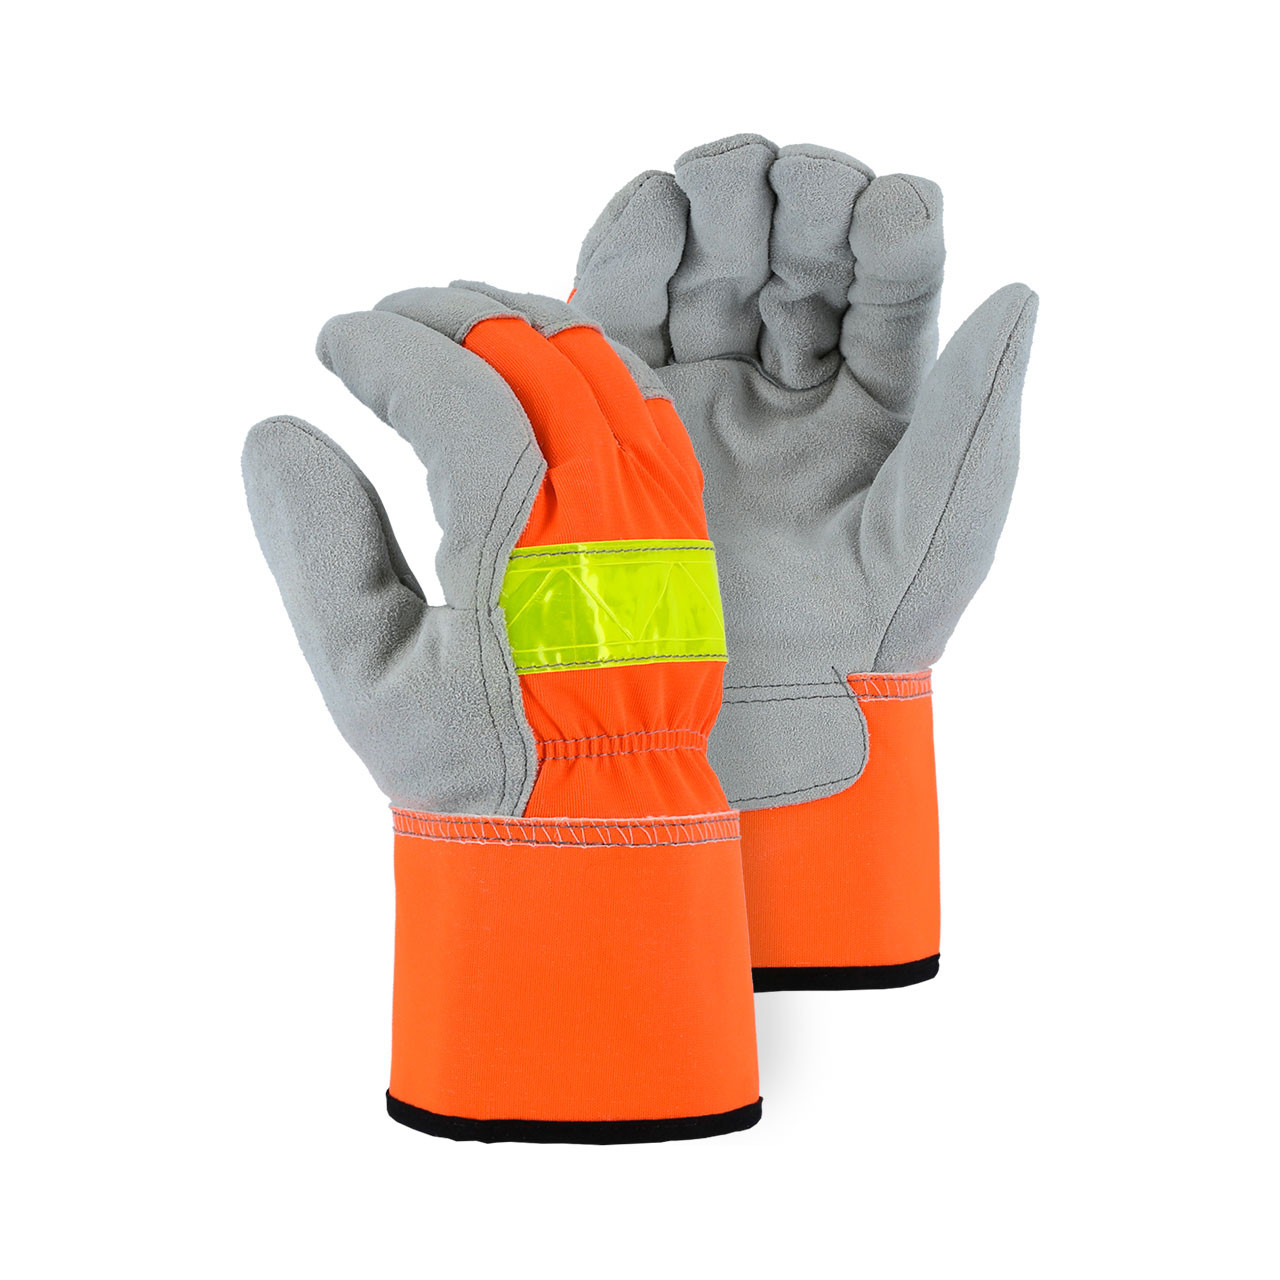 Majestic 1960 High Visibility Split Pig Winter Lined Gloves w/ Orange Safety Cuff, Box/12 Pairs - 8